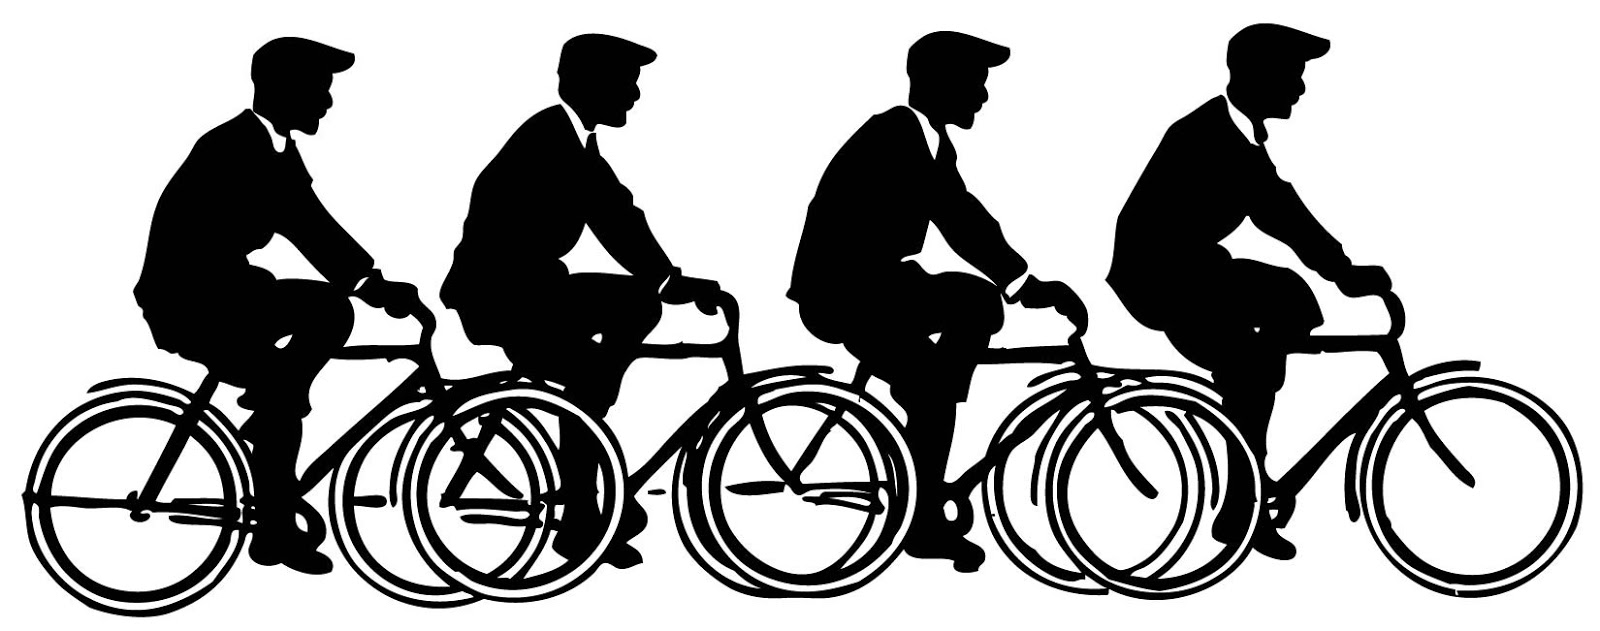     Images   Vintage Men On Bicycles   Silhouette   The Graphics Fairy